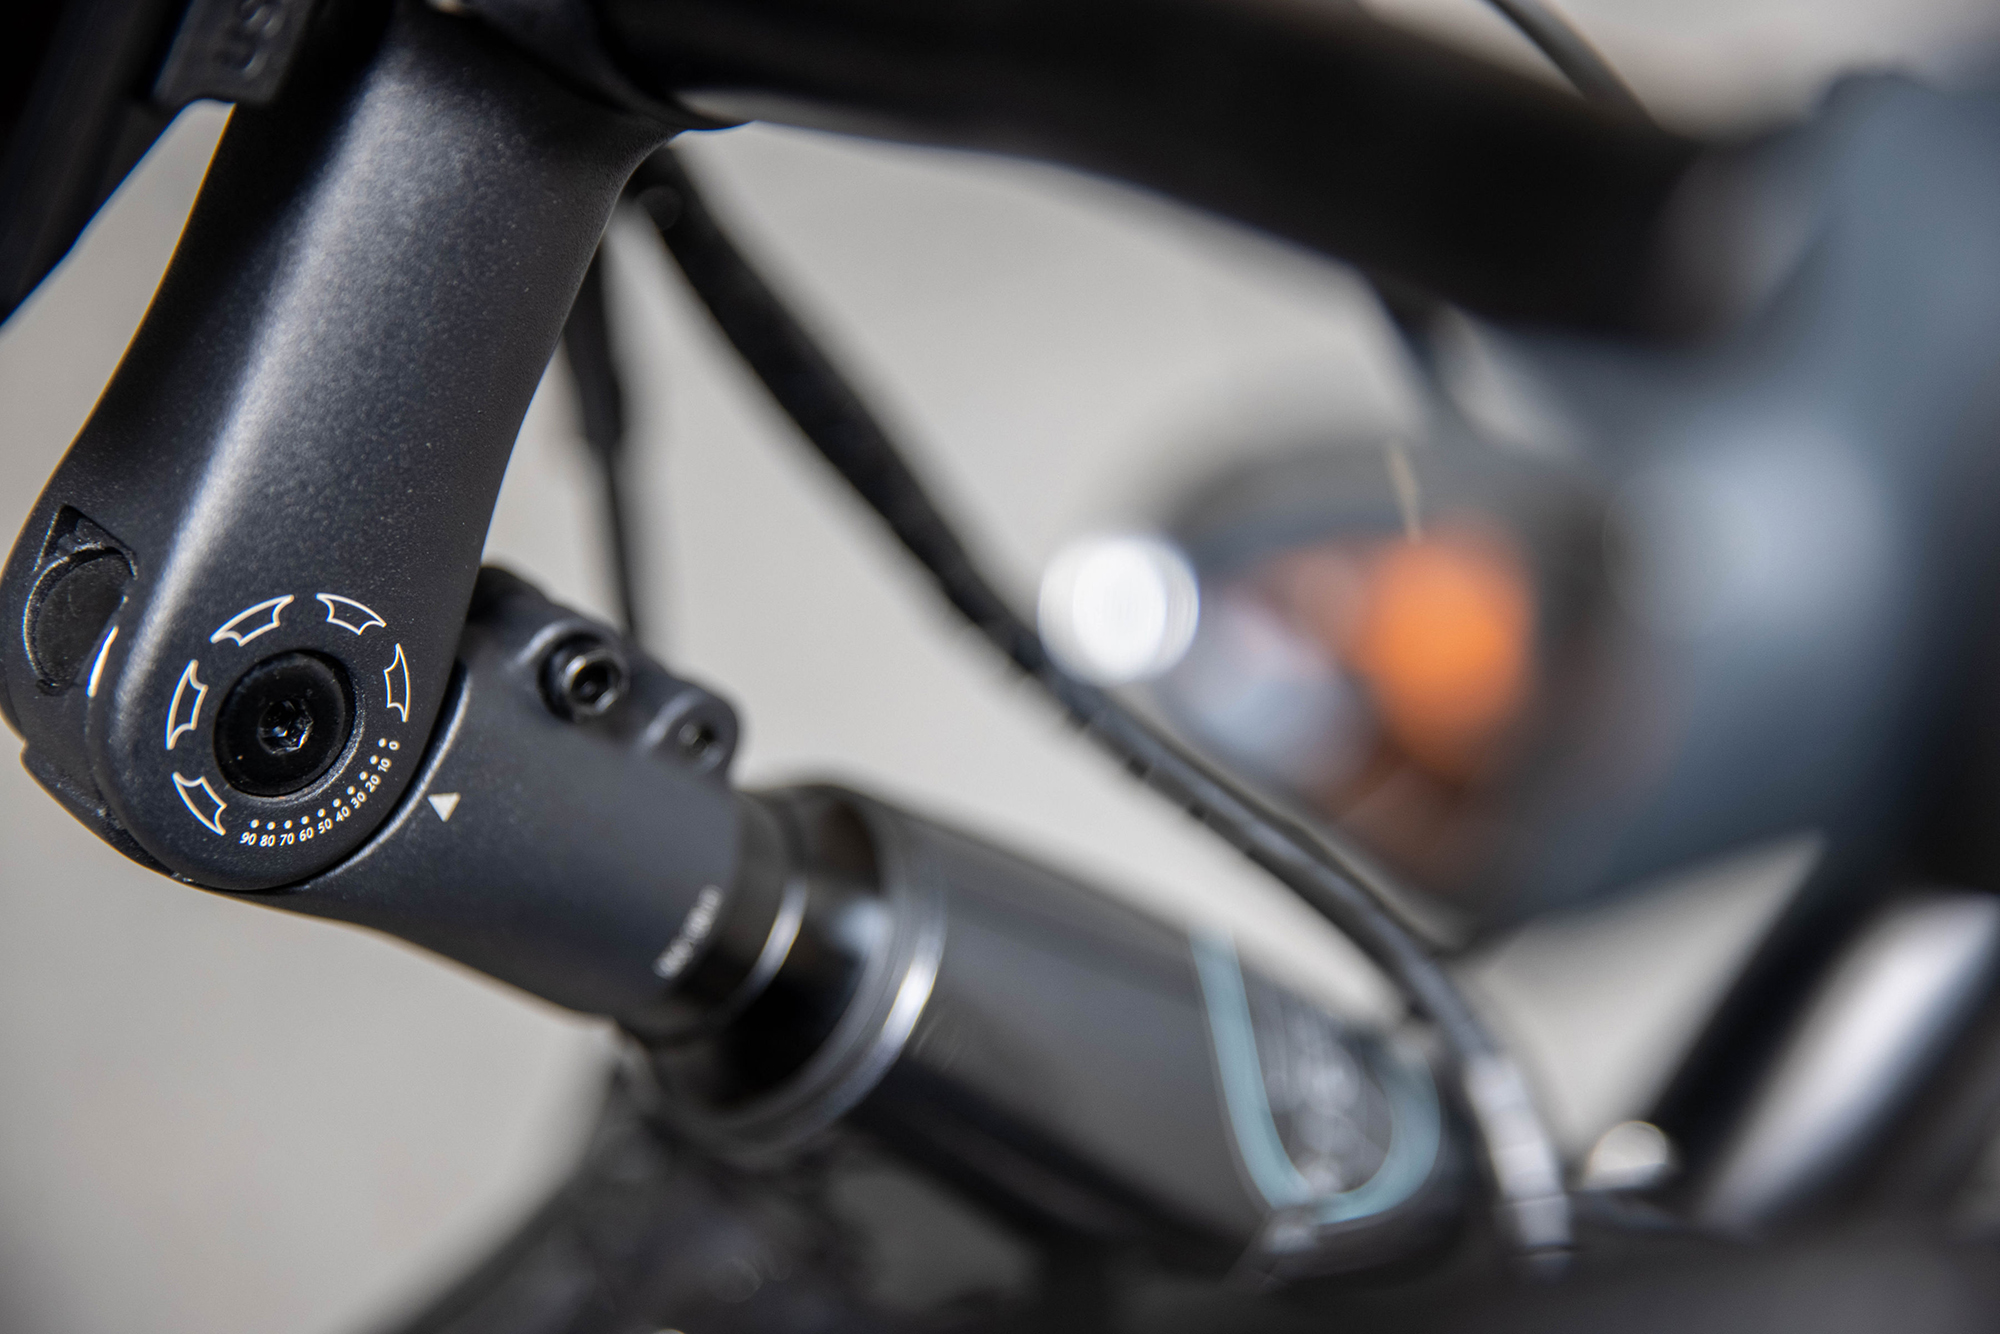 detail of the adjustable stem on the Priority current electric bike